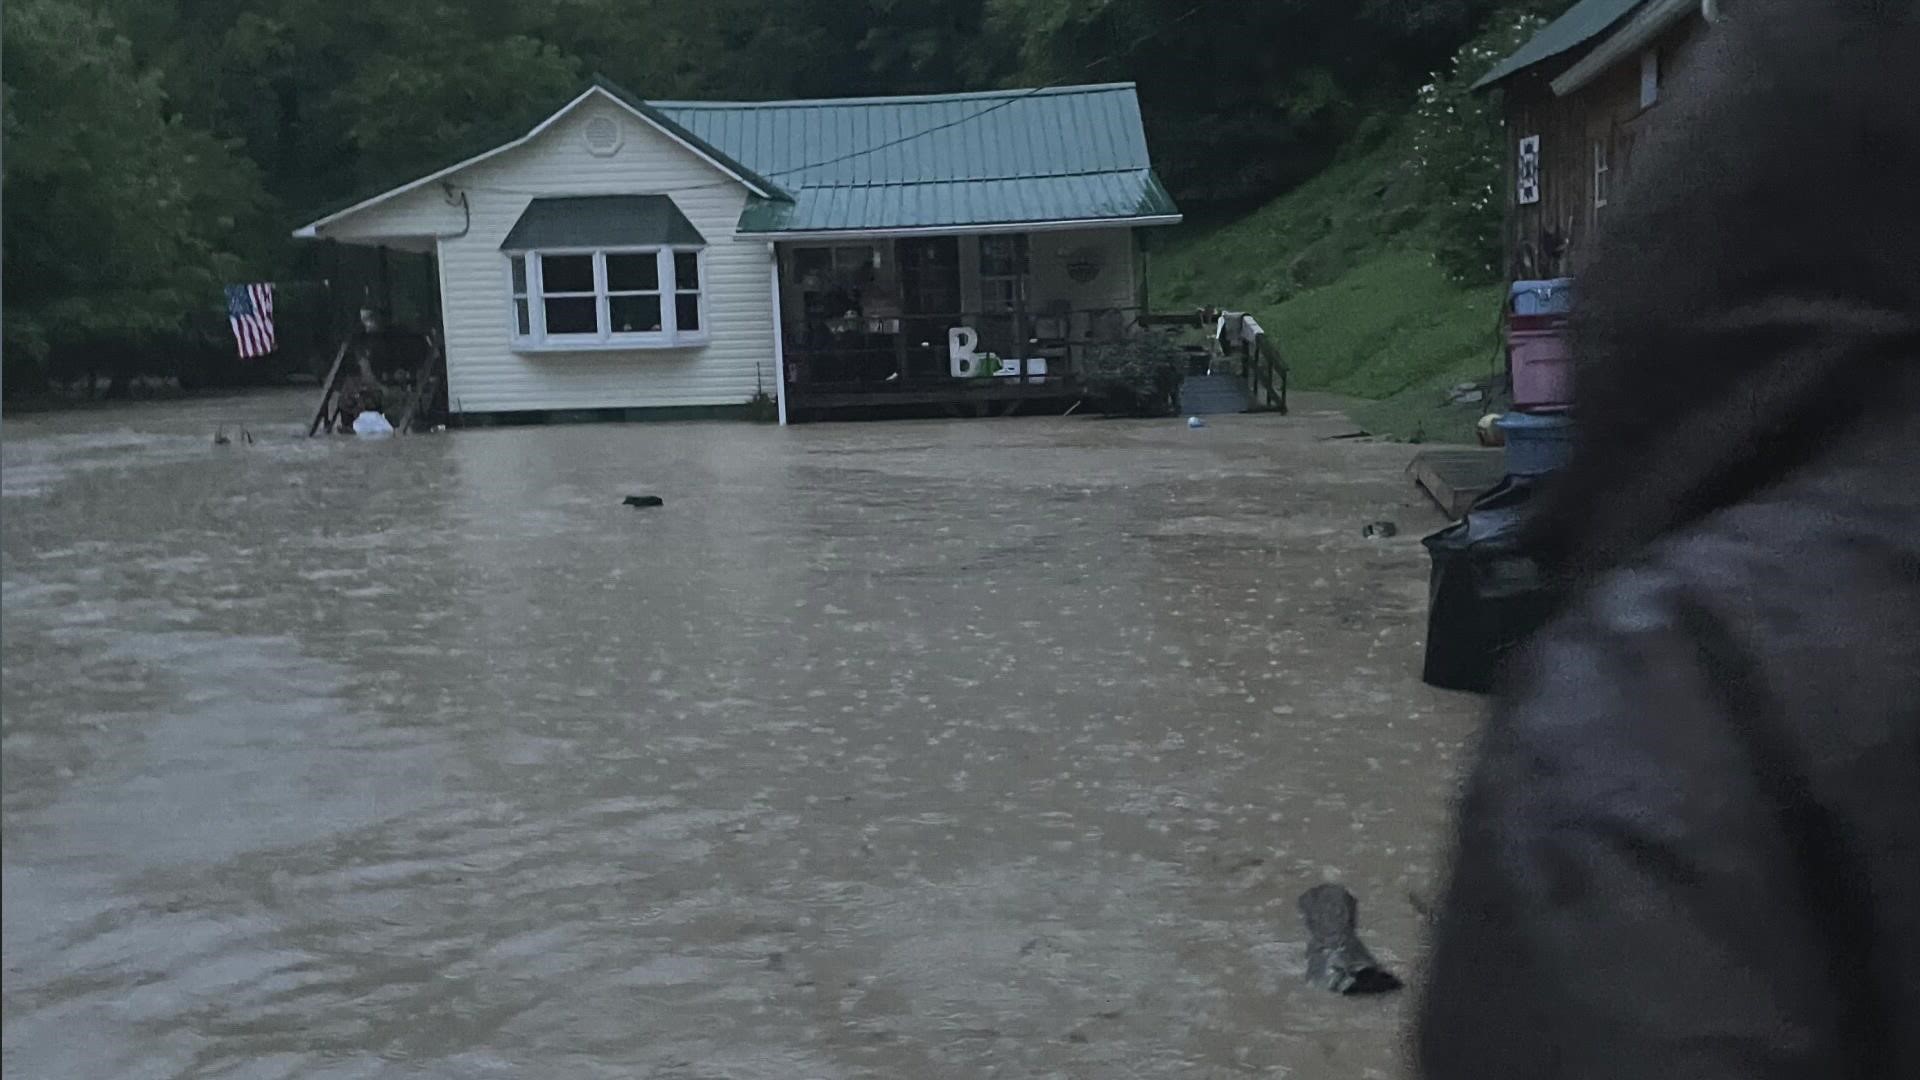 April Back-Stevens said her parent's house is sitting atop a hill, engulfed by flood waters, like an island.